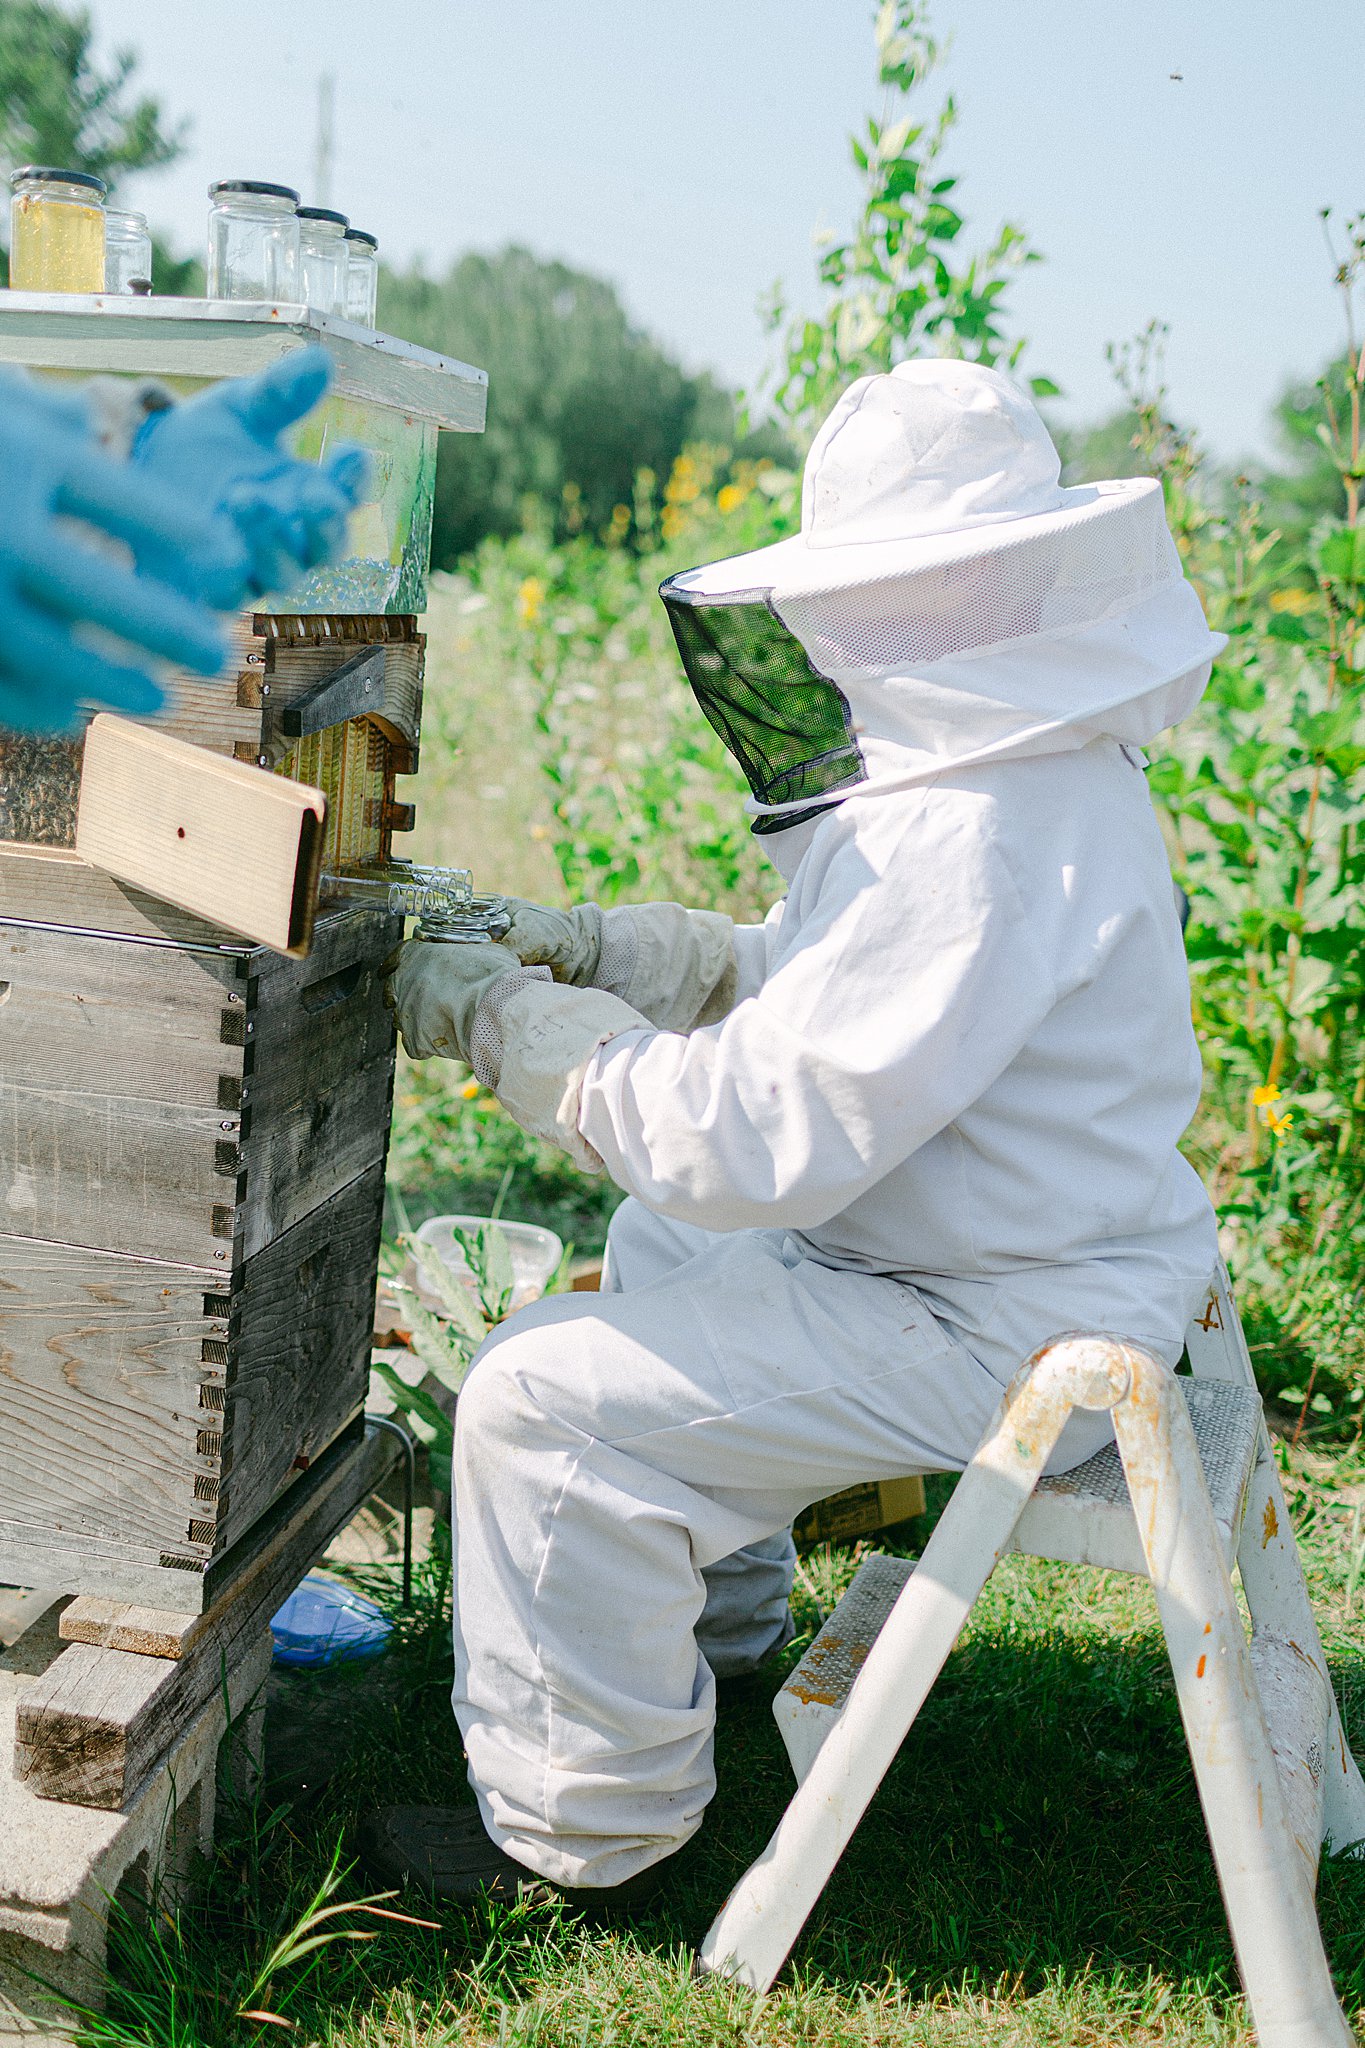 The beekeeper extracting honey from the hive at the Honey Harvest at Crossroads